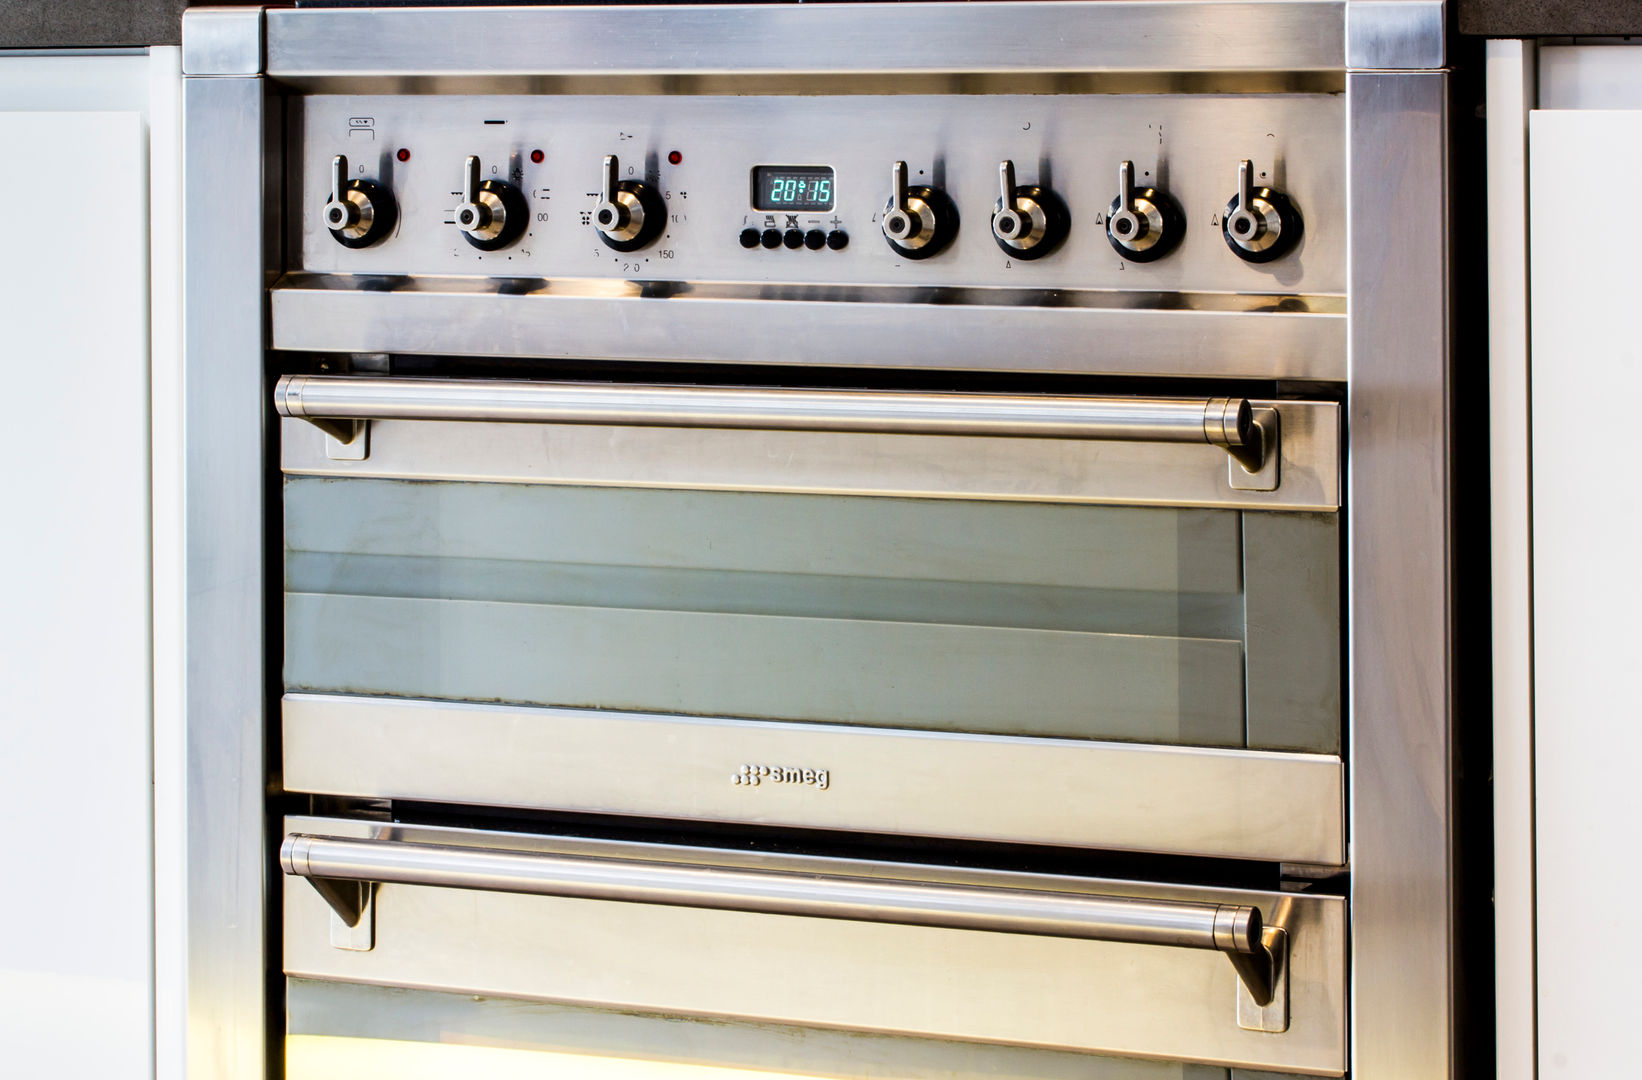 Modern cooker and oven Affleck Property Services Modern kitchen Accessories & textiles